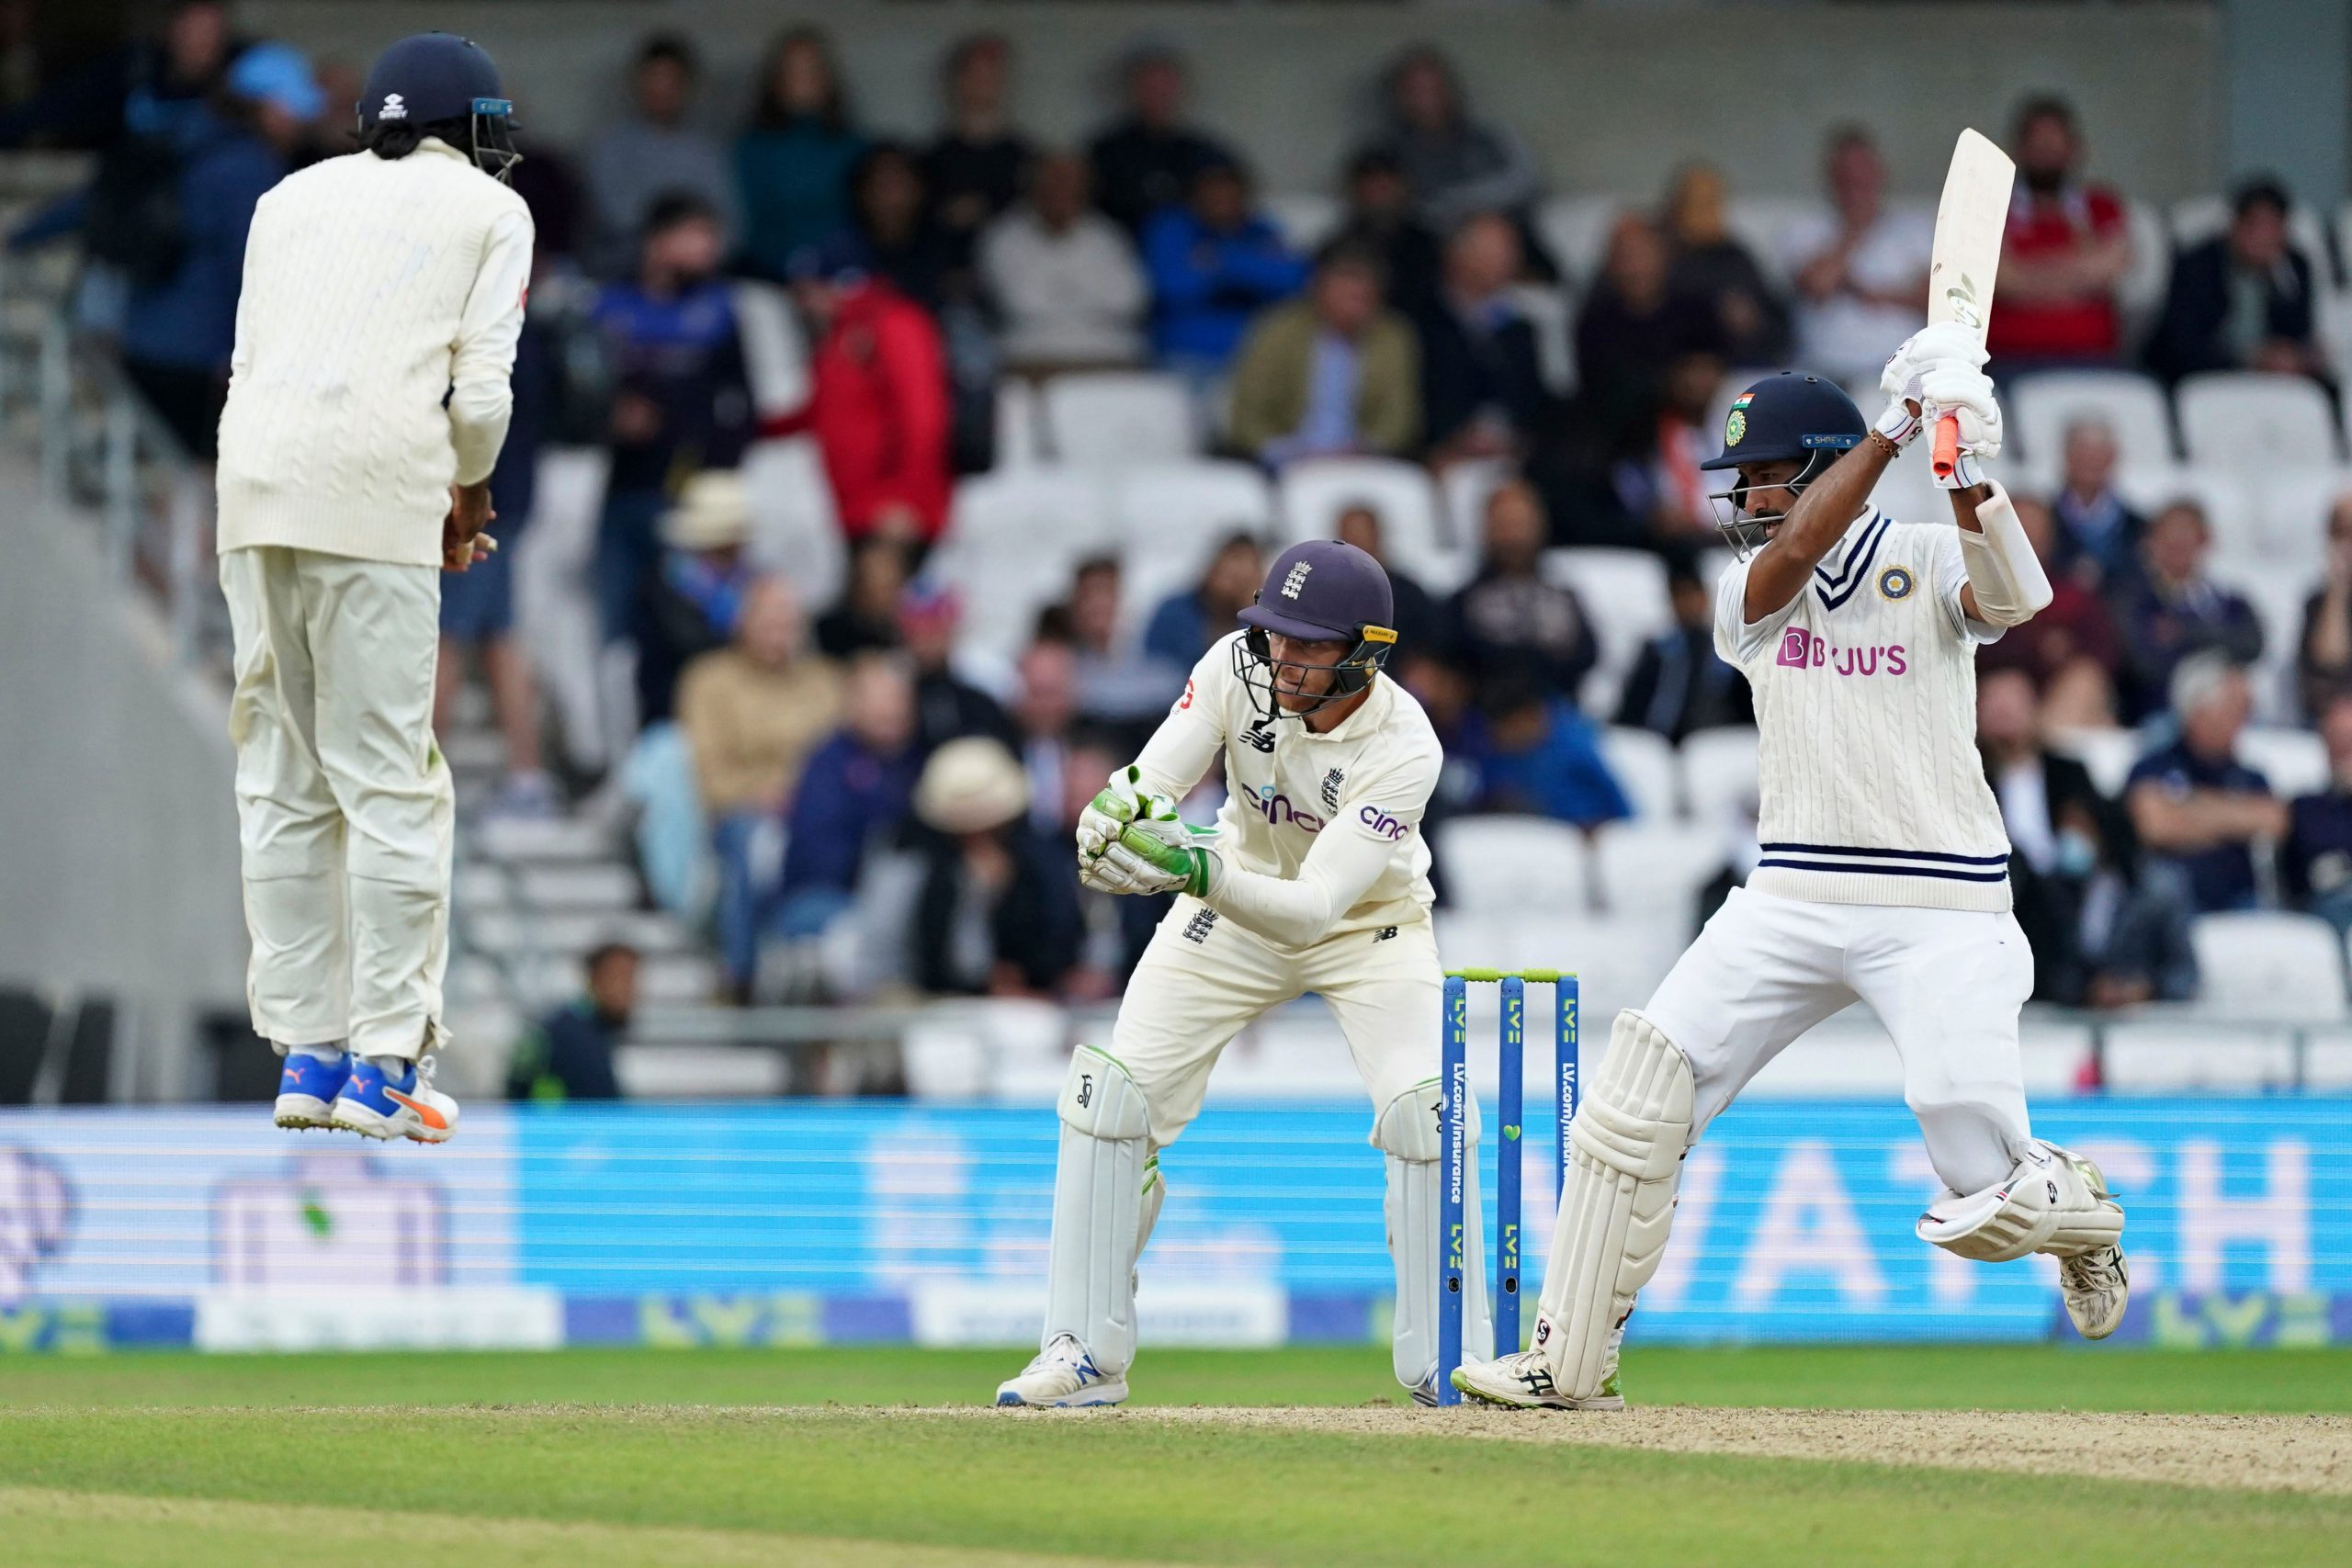 India vs England 4th Test: When and where to watch, live stream